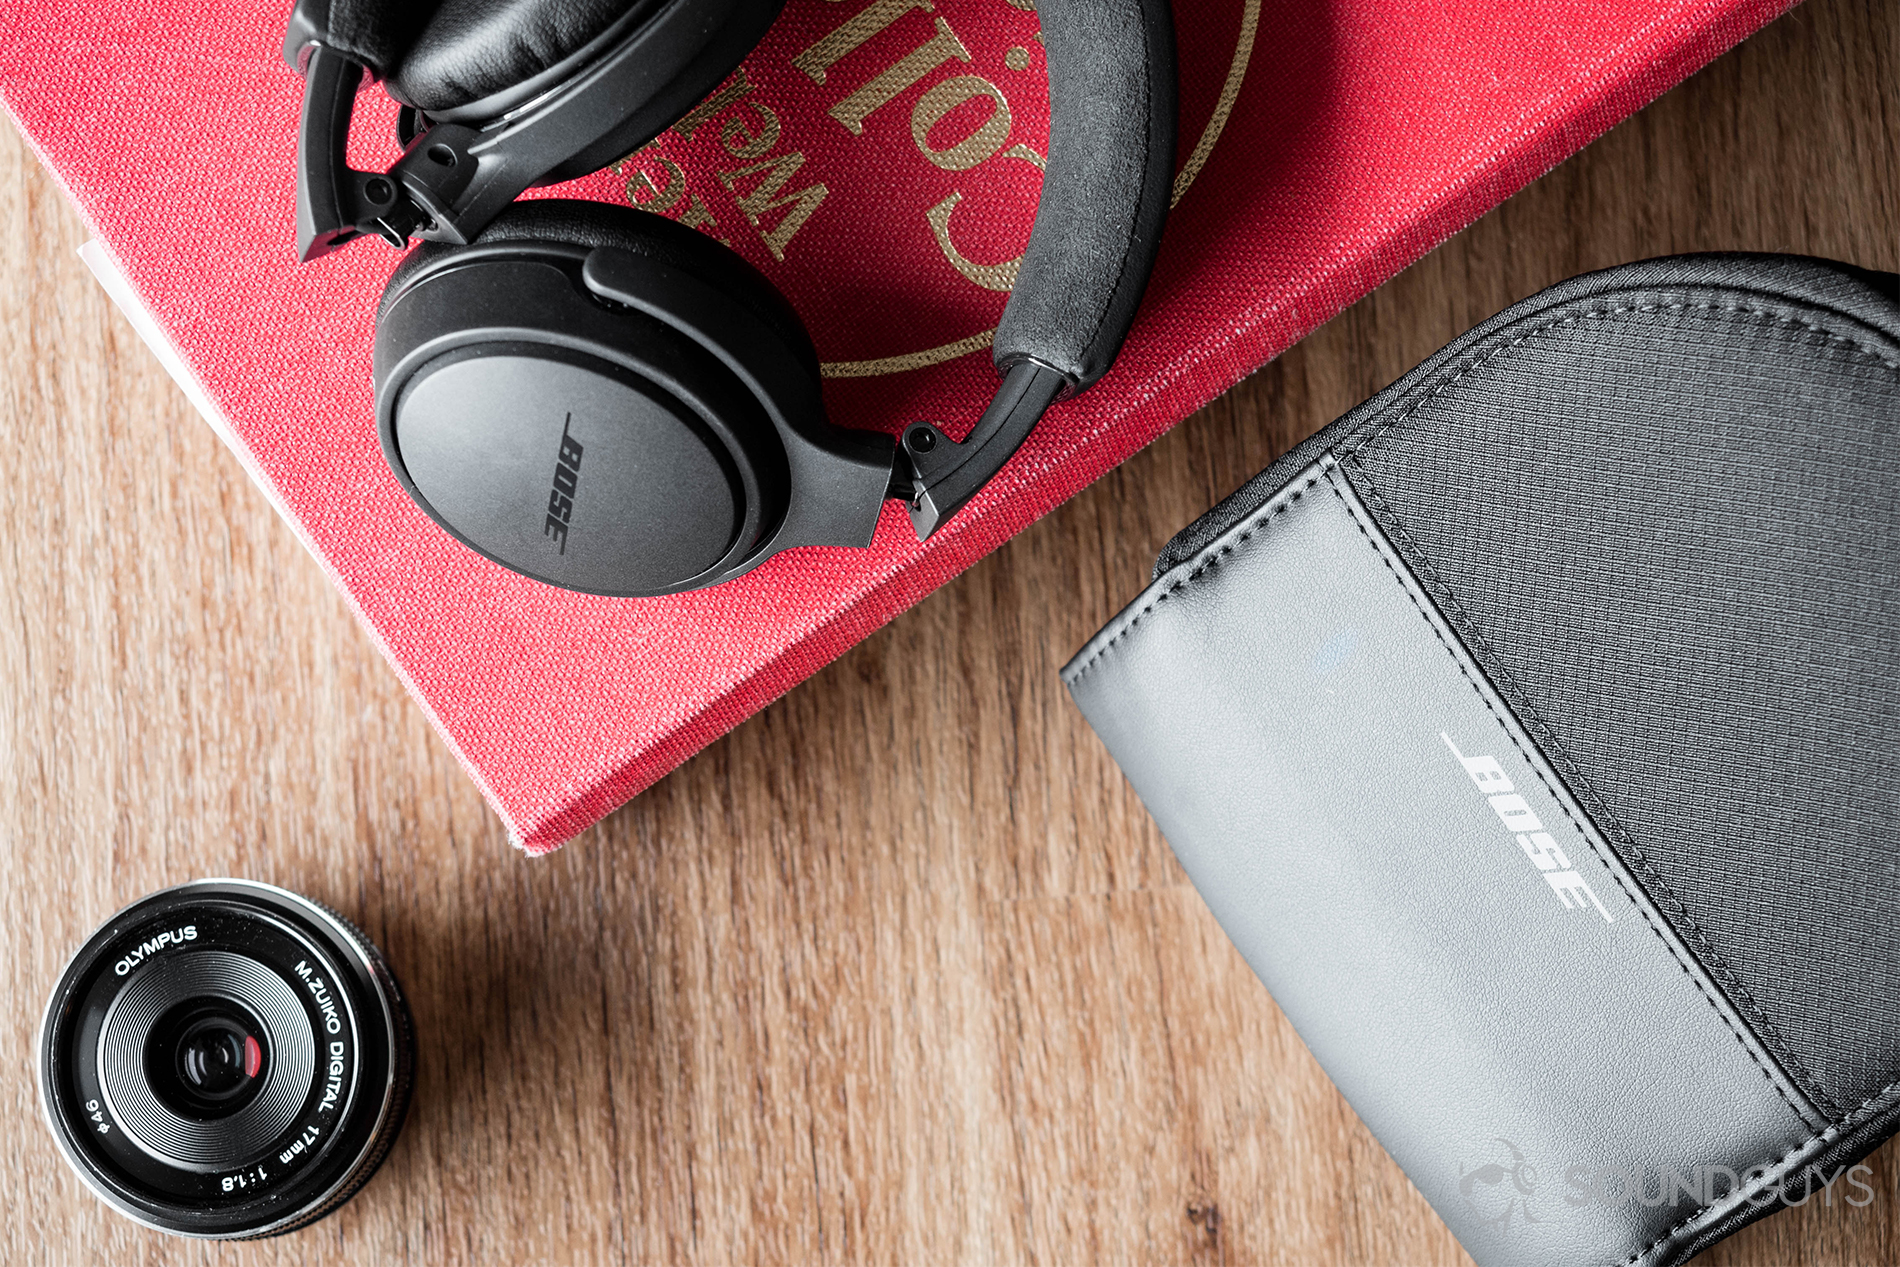 A photo of the Bose On-Ear Wireless headphones with the zippered carrying case and a lens in the corner. These are formed in a triangle-shaped position to balance out the frame, and the headphones are elevated on a red Webster's Dictionary.